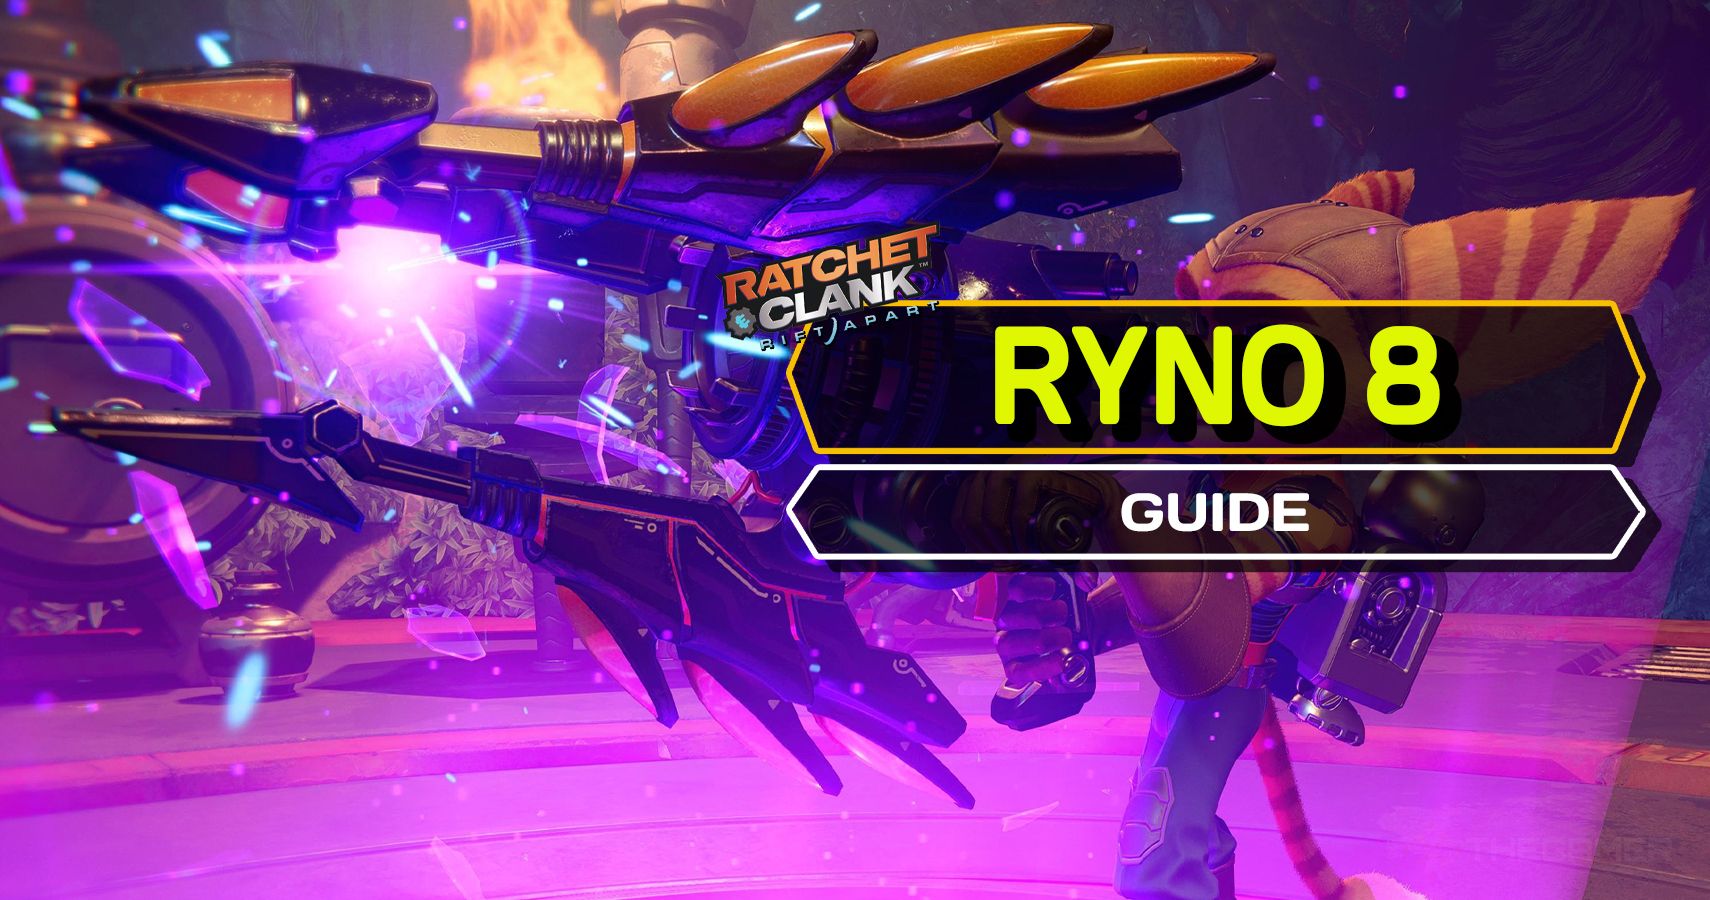 Ratchet & Clank: Rift Apart's RYNO 8 is a PlayStation cameo gun - Polygon